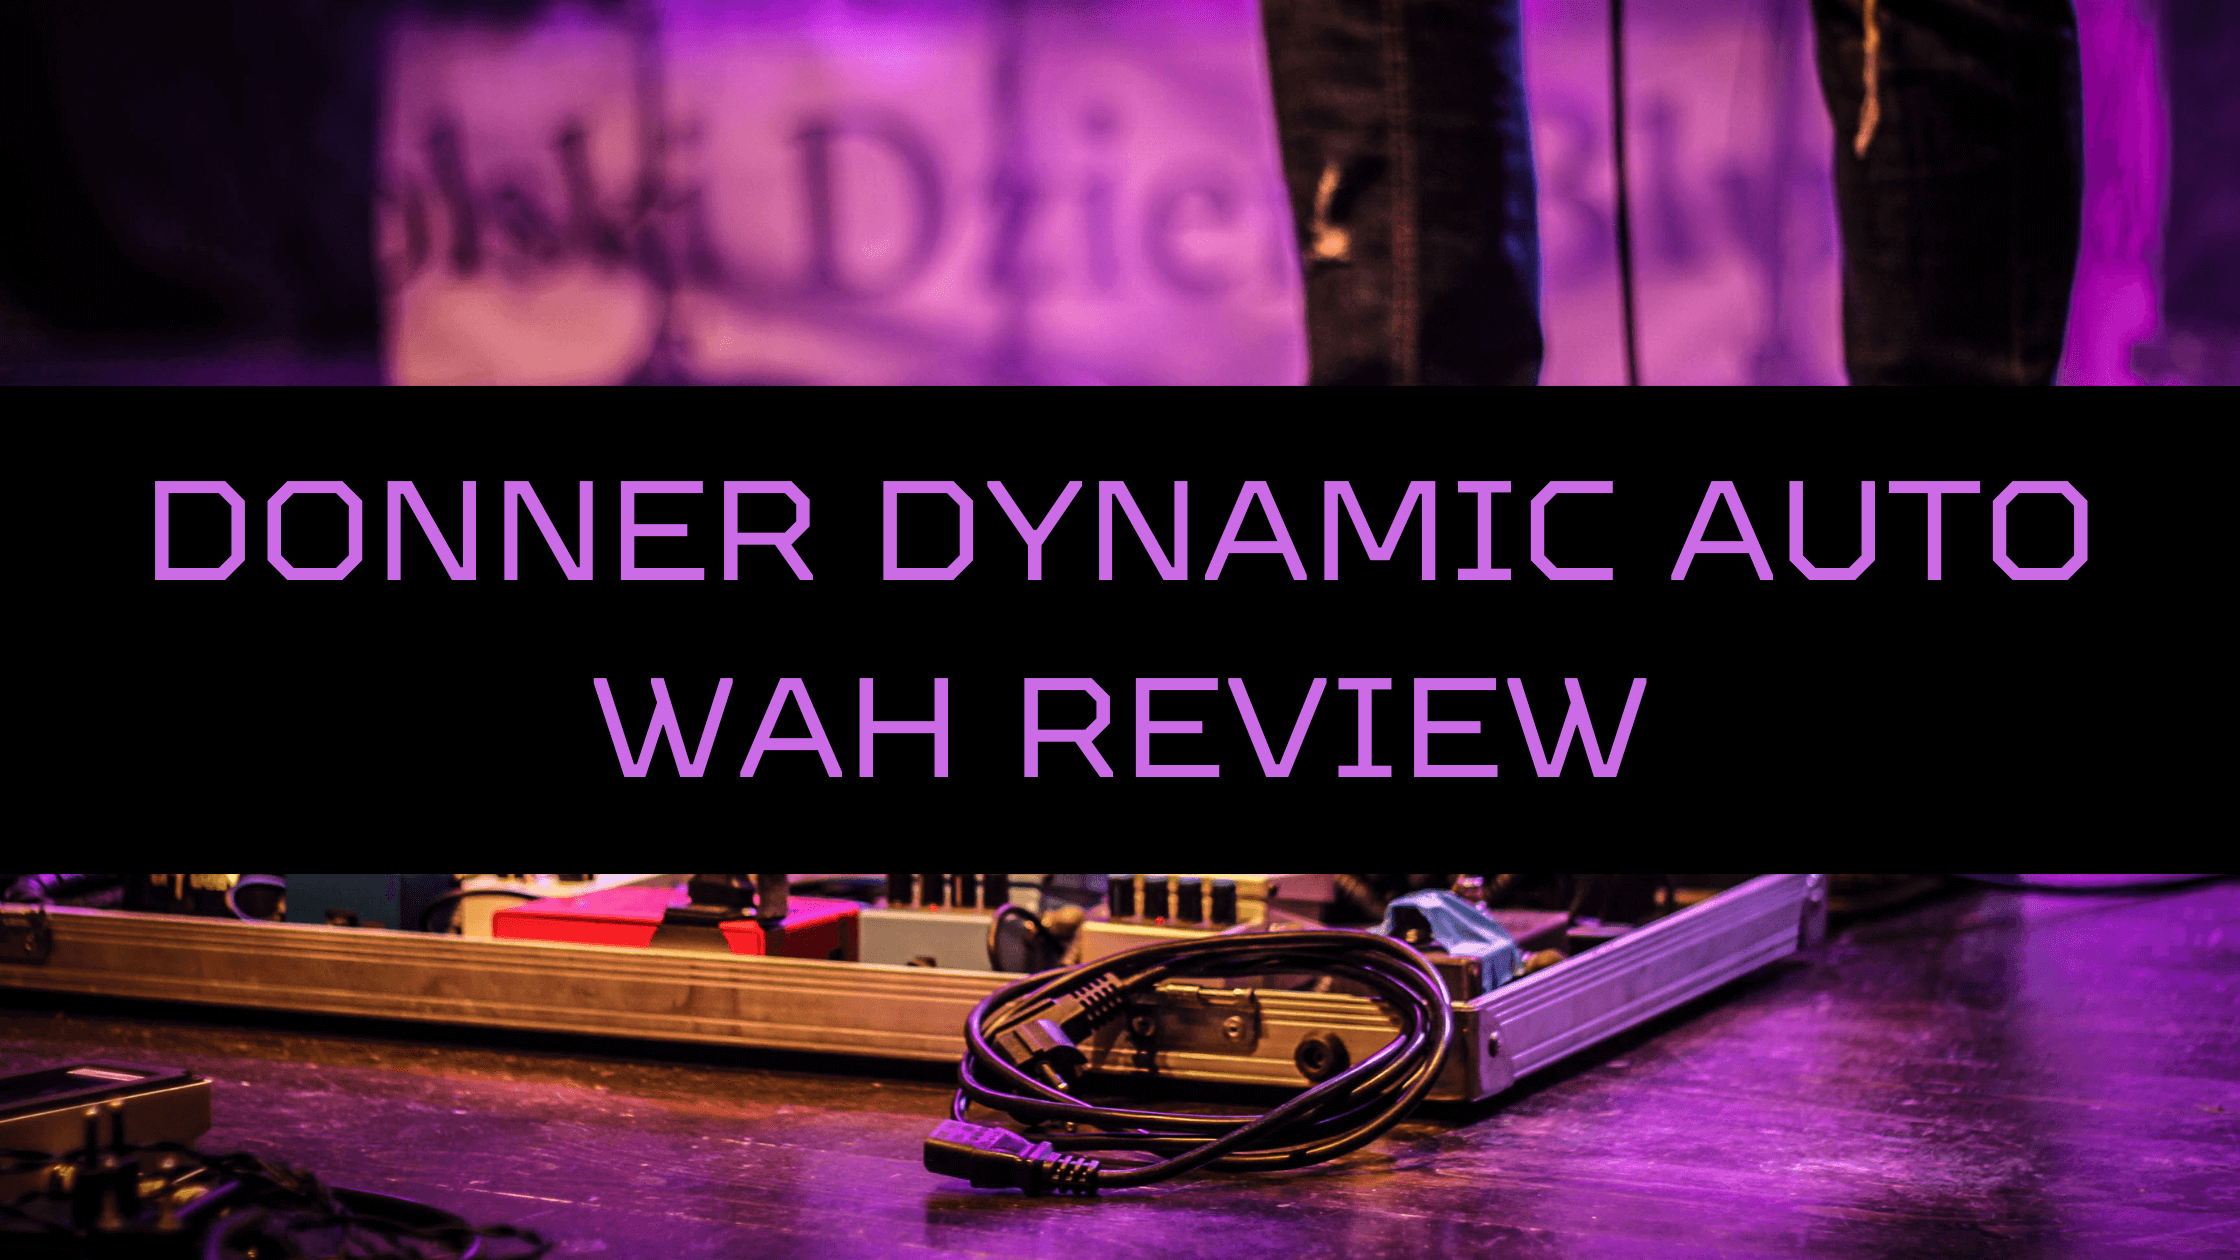 Donner Dynamic Auto Wah Review